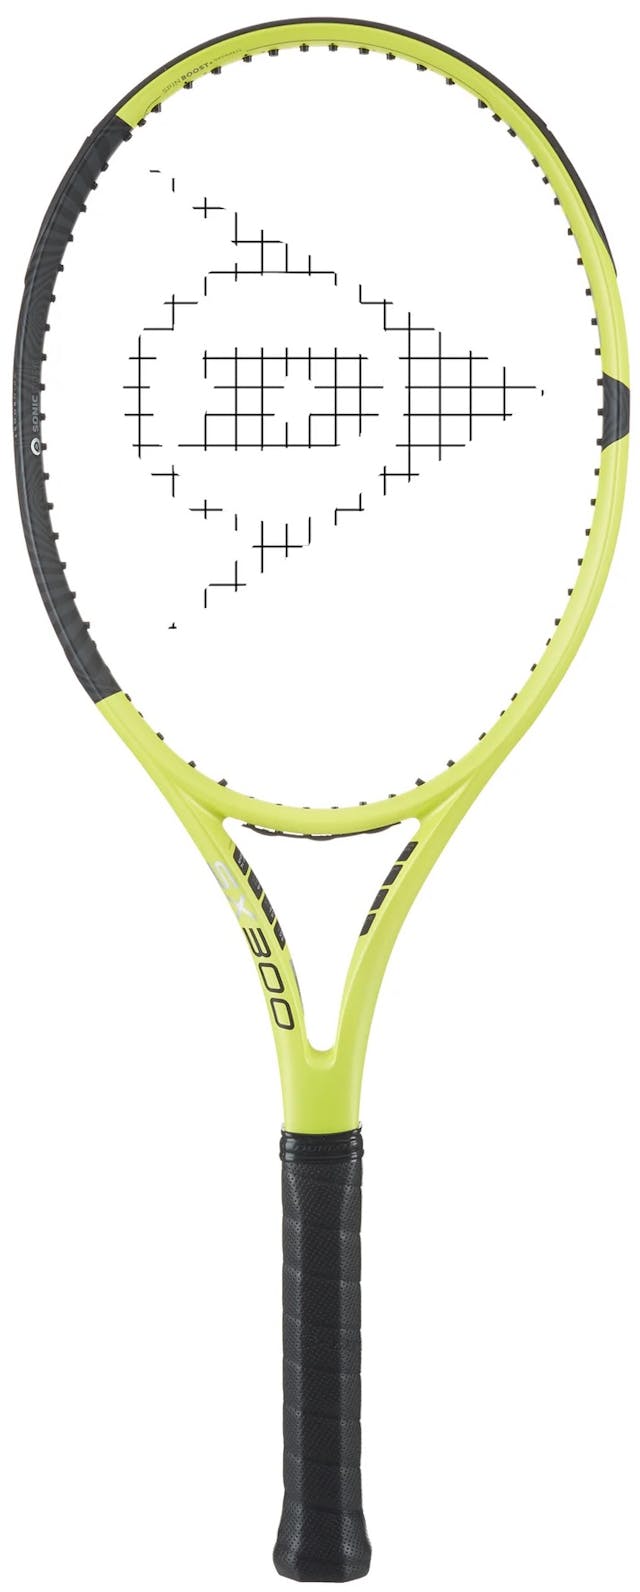 The image for the Dunlop SX 2022